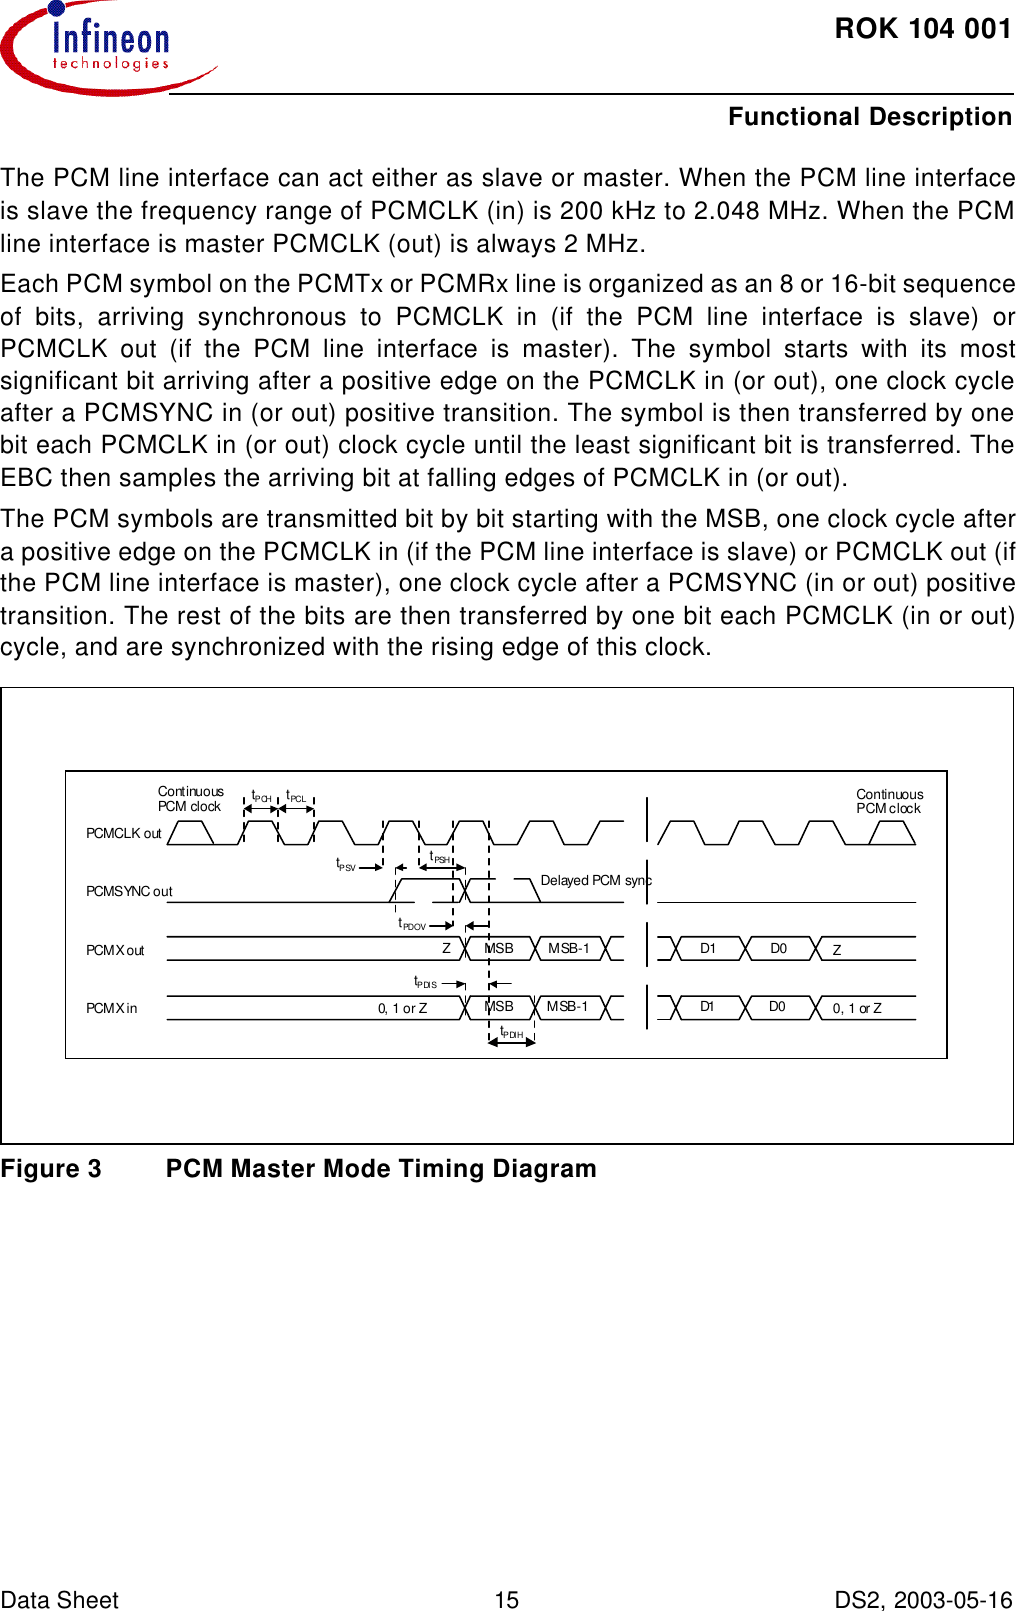 ROK104001Functional Description Data Sheet 15 DS2, 2003-05-16  The PCM line interface can act either as slave or master. When the PCM line interfaceis slave the frequency range of PCMCLK (in) is 200 kHz to 2.048 MHz. When the PCMline interface is master PCMCLK (out) is always 2 MHz.Each PCM symbol on the PCMTx or PCMRx line is organized as an 8 or 16-bit sequenceof bits, arriving synchronous to PCMCLK in (if the PCM line interface is slave) orPCMCLK out (if the PCM line interface is master). The symbol starts with its mostsignificant bit arriving after a positive edge on the PCMCLK in (or out), one clock cycleafter a PCMSYNC in (or out) positive transition. The symbol is then transferred by onebit each PCMCLK in (or out) clock cycle until the least significant bit is transferred. TheEBC then samples the arriving bit at falling edges of PCMCLK in (or out).The PCM symbols are transmitted bit by bit starting with the MSB, one clock cycle aftera positive edge on the PCMCLK in (if the PCM line interface is slave) or PCMCLK out (ifthe PCM line interface is master), one clock cycle after a PCMSYNC (in or out) positivetransition. The rest of the bits are then transferred by one bit each PCMCLK (in or out)cycle, and are synchronized with the rising edge of this clock.Figure3 PCM Master Mode Timing DiagramZZ0,1 orZ0,1 orZtPCH ContinuousPCMclockContinuousPCMclockDelayed PCMsyncPCMSYNC outPCMCLKoutPCMXinPCMXouttPDIHtPDIStPDOVtPSHtPSVtPCLMSB MSB-1D1D0D1D0MSB MSB-1